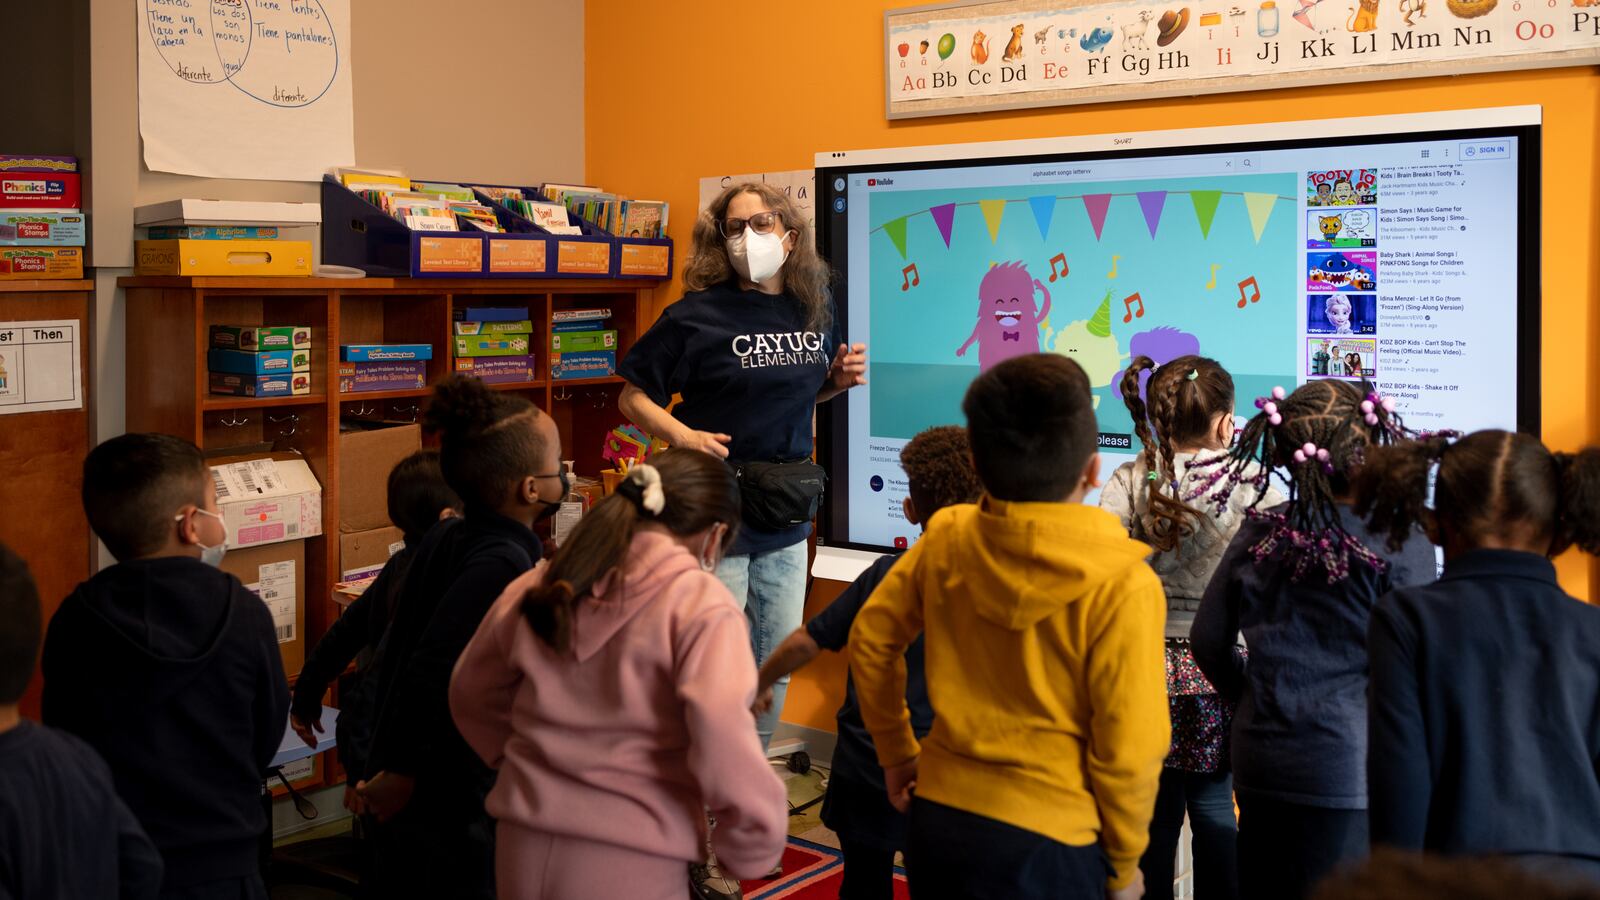 A teacher, wearing a filter mask and navy blue Cayuga Elementary school shirt, leads her young students in an active exercise during class.